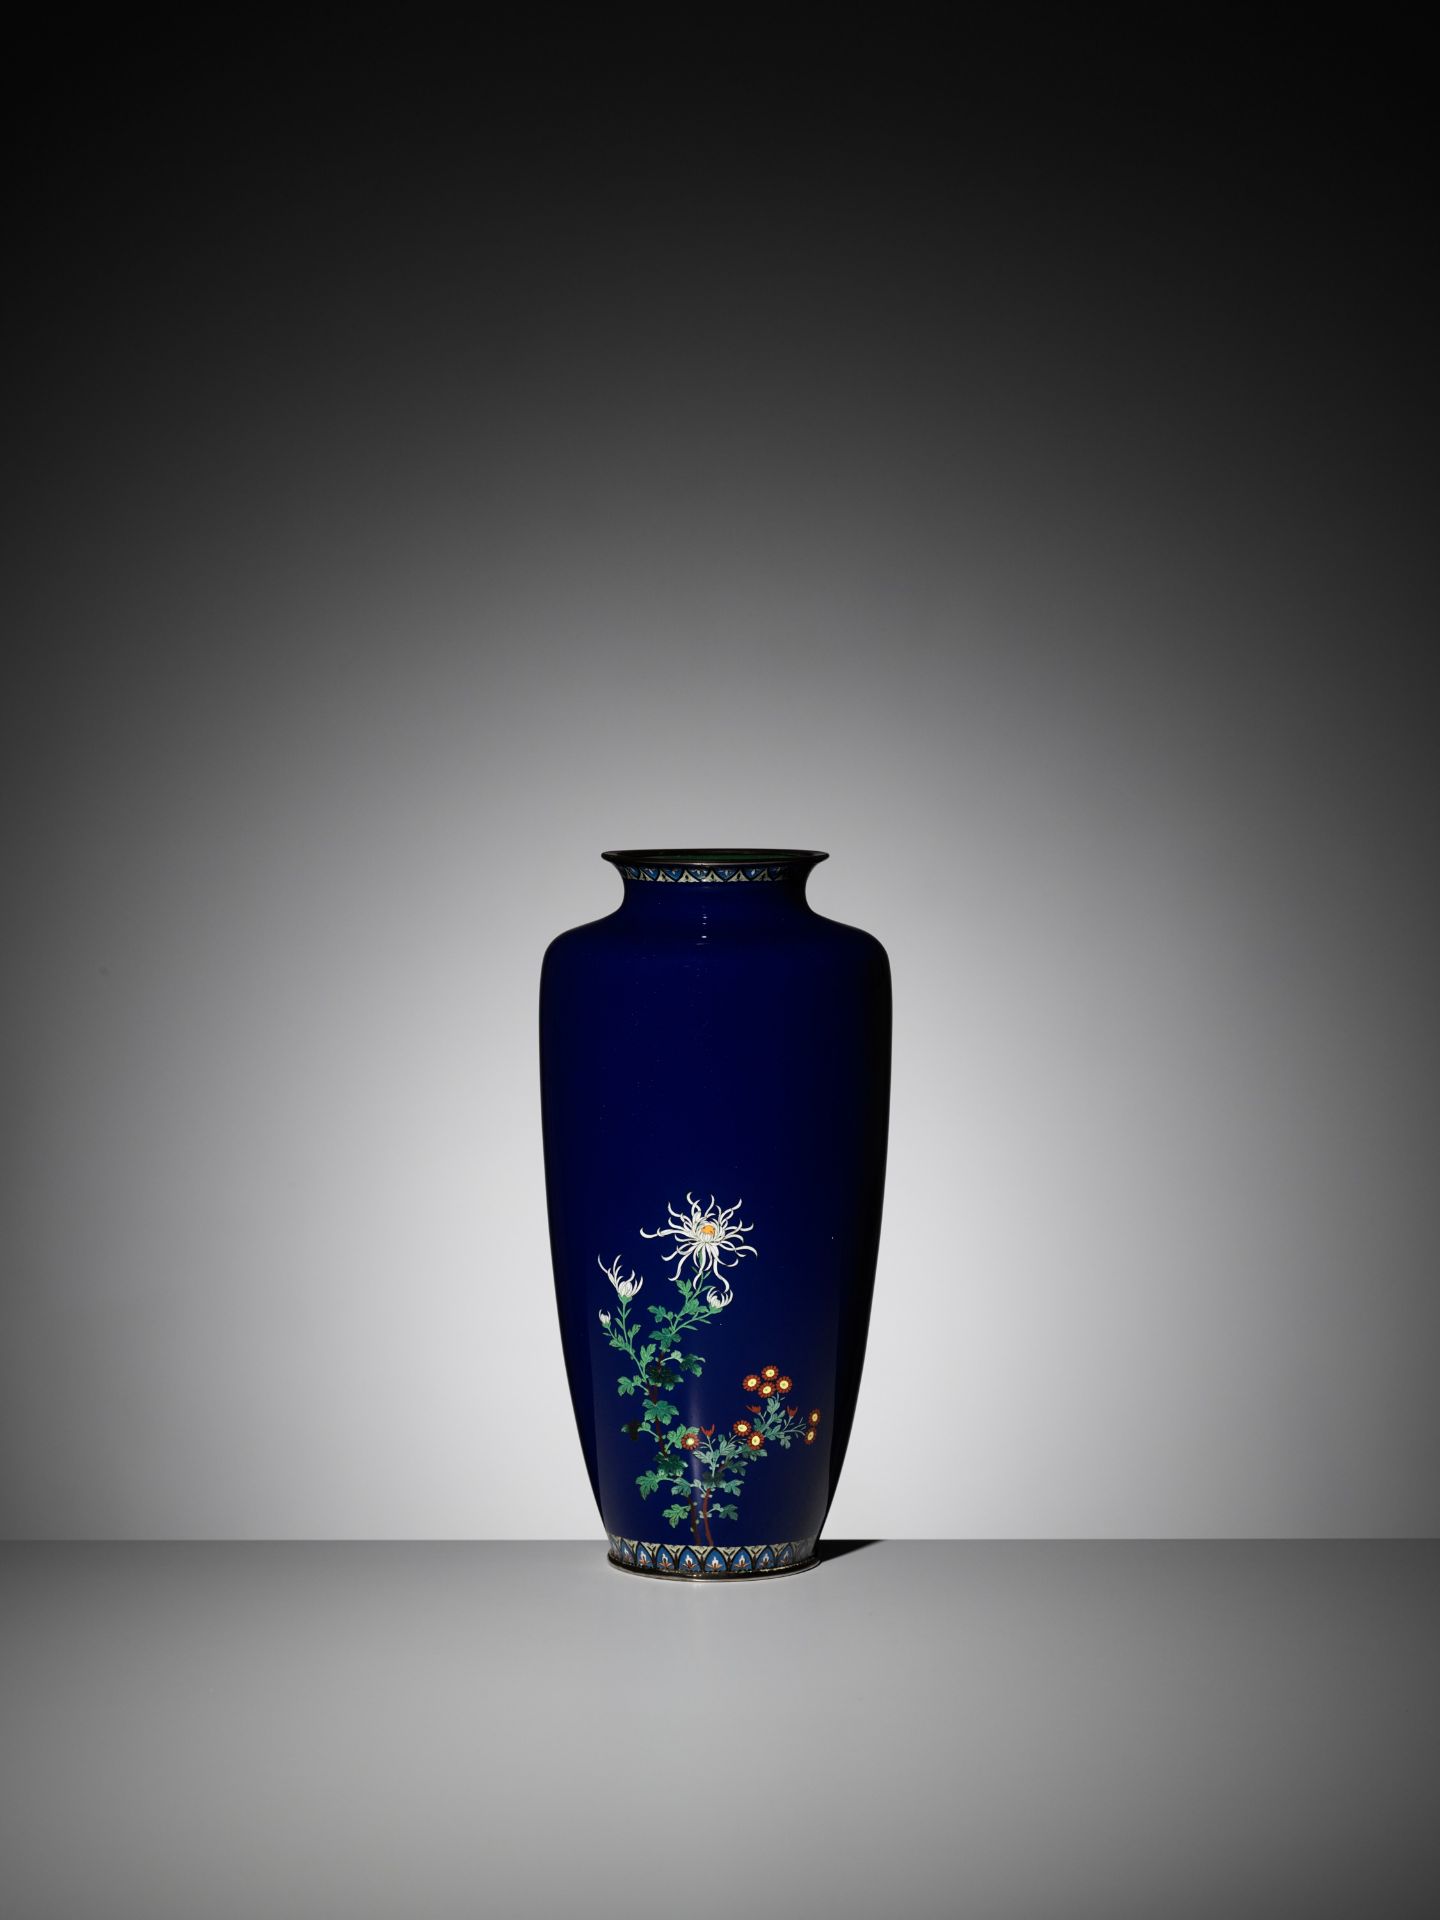 A LARGE MIDNIGHT-BLUE CLOISONNÃ‰ VASE WITH FLOWERS - Image 3 of 10